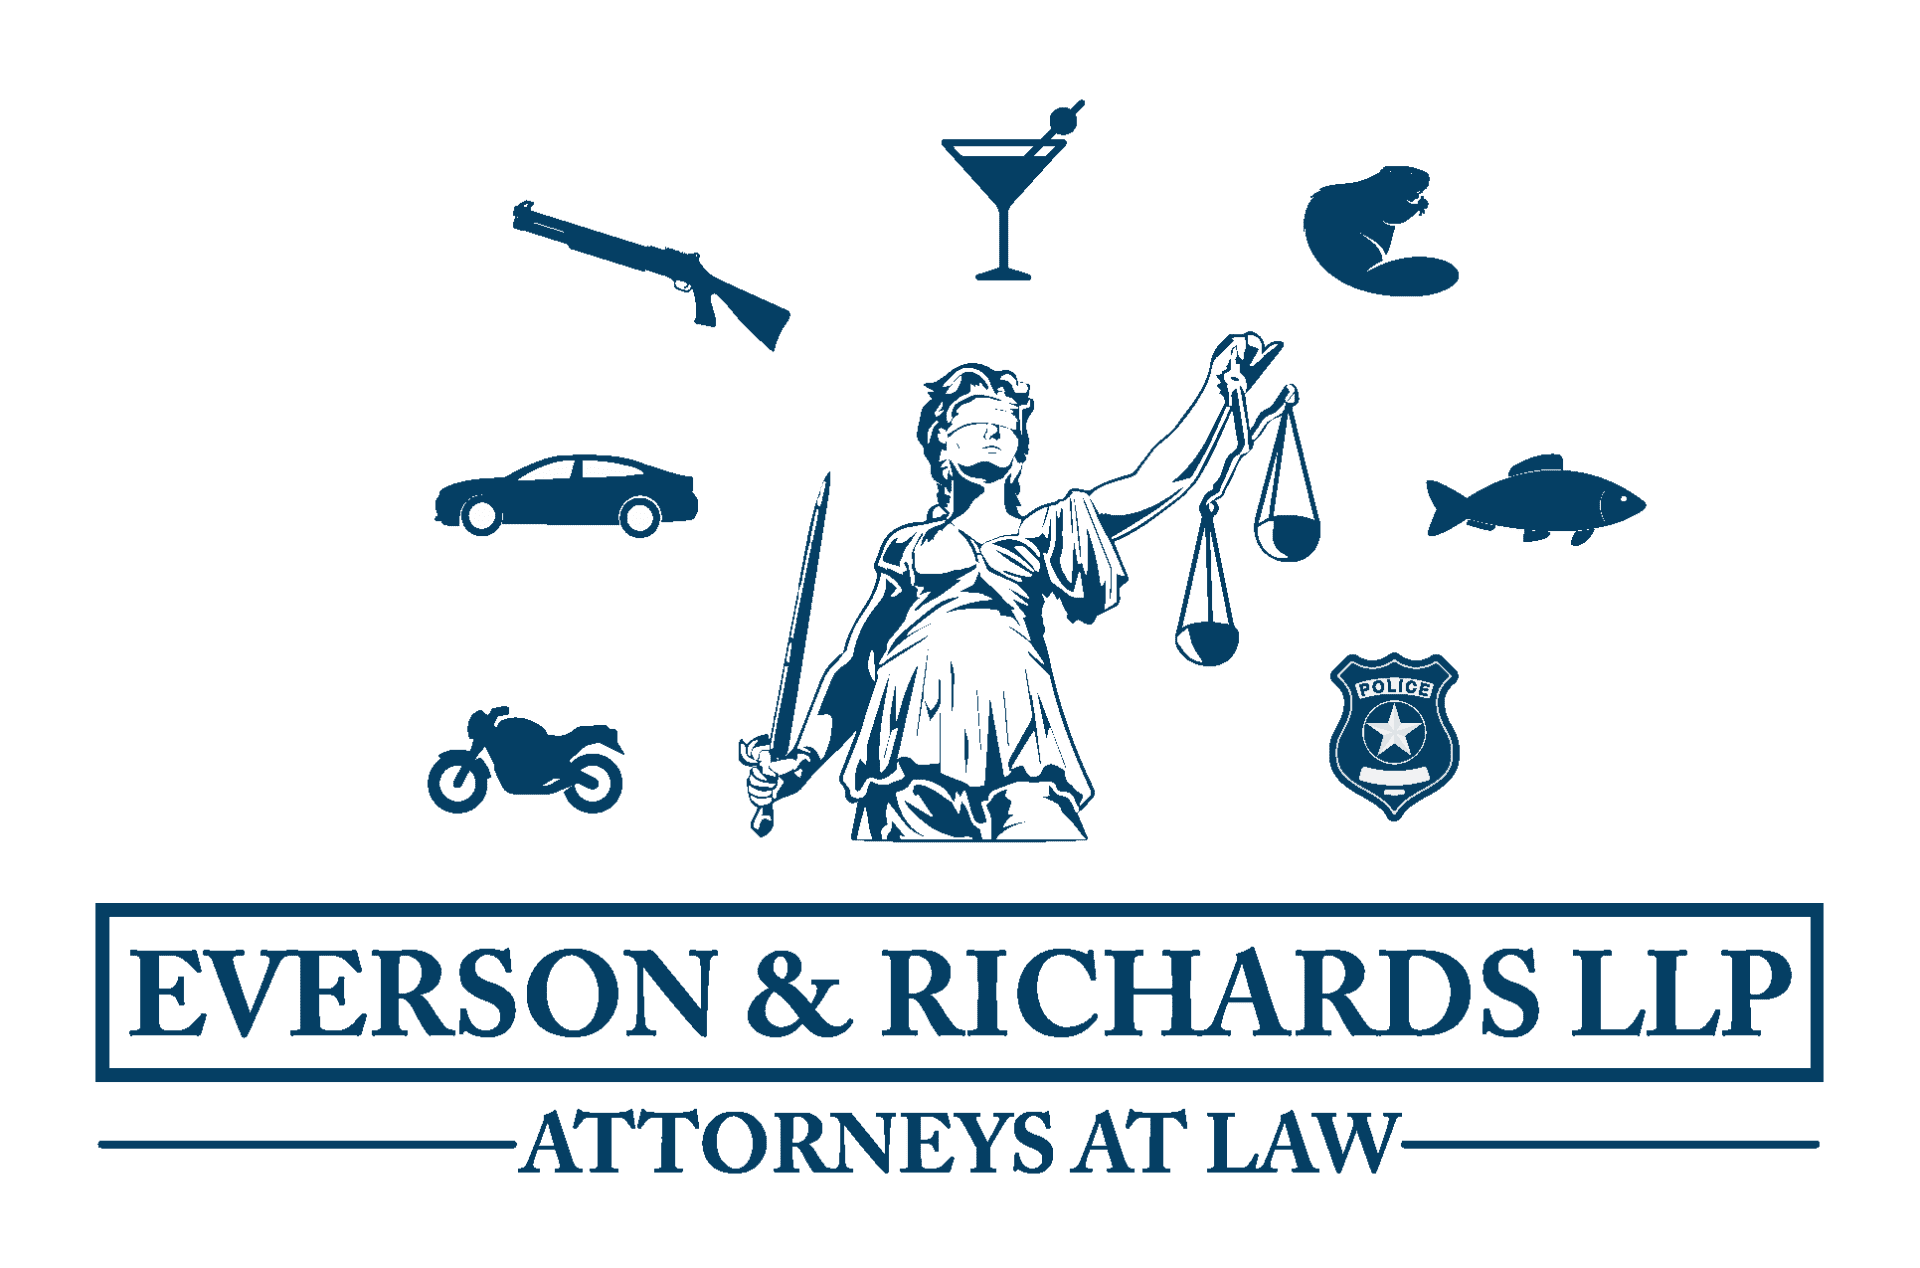 Everson & Richards LLP Law Offices in Van Dyne, WI